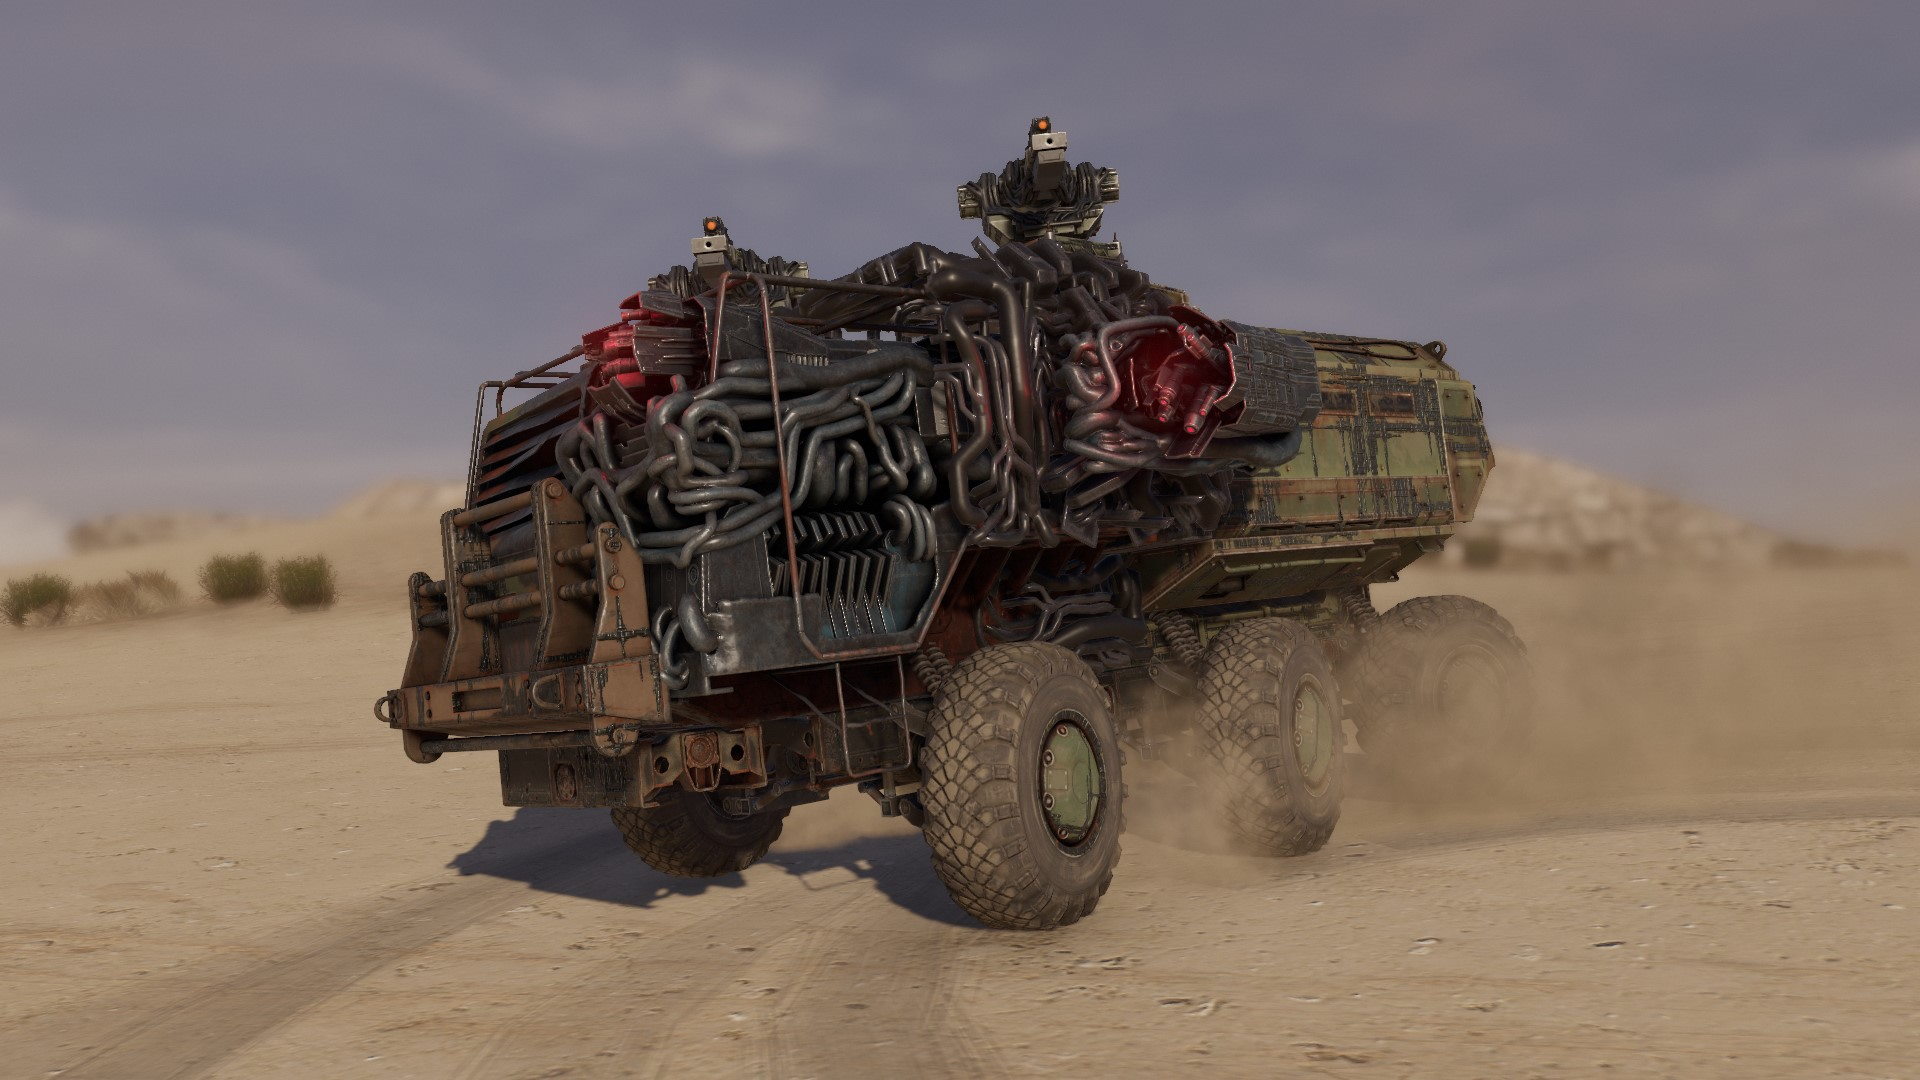 crossout for ps4